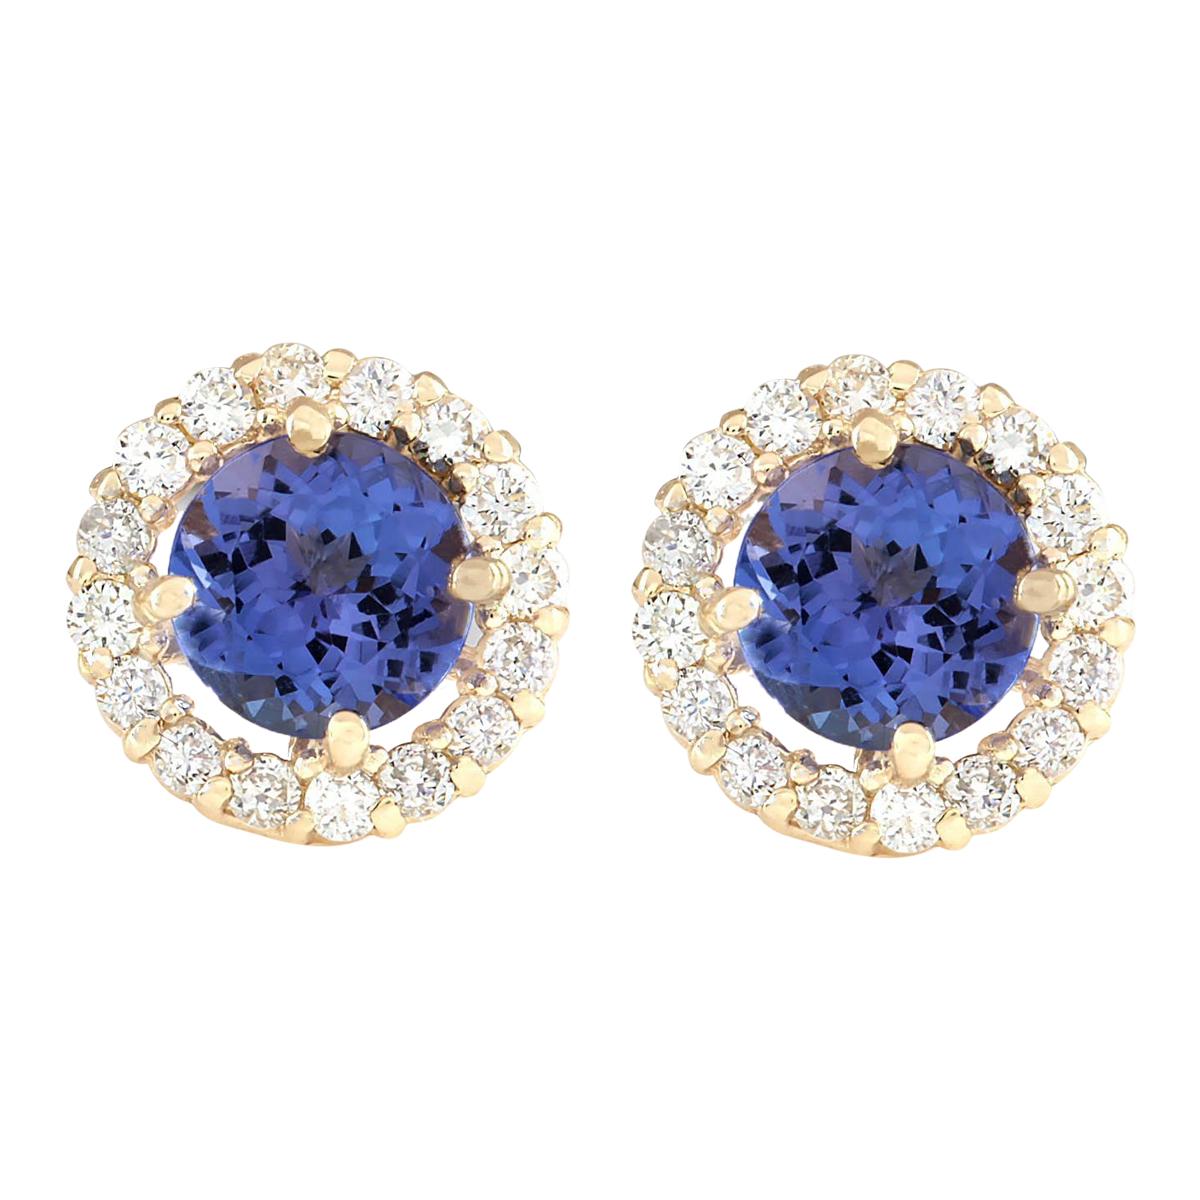 2.65 Carat Natural Tanzanite 14 Karat Yellow Gold Diamond Earrings
Stamped: 14K Yellow Gold
Total Earrings Weight: 2.0 Grams
Total Natural Tanzanite Weight is 2.00 Carat (Measures: 6.50x6.50 mm)
Color: Blue
Total Natural Diamond Weight is 0.65